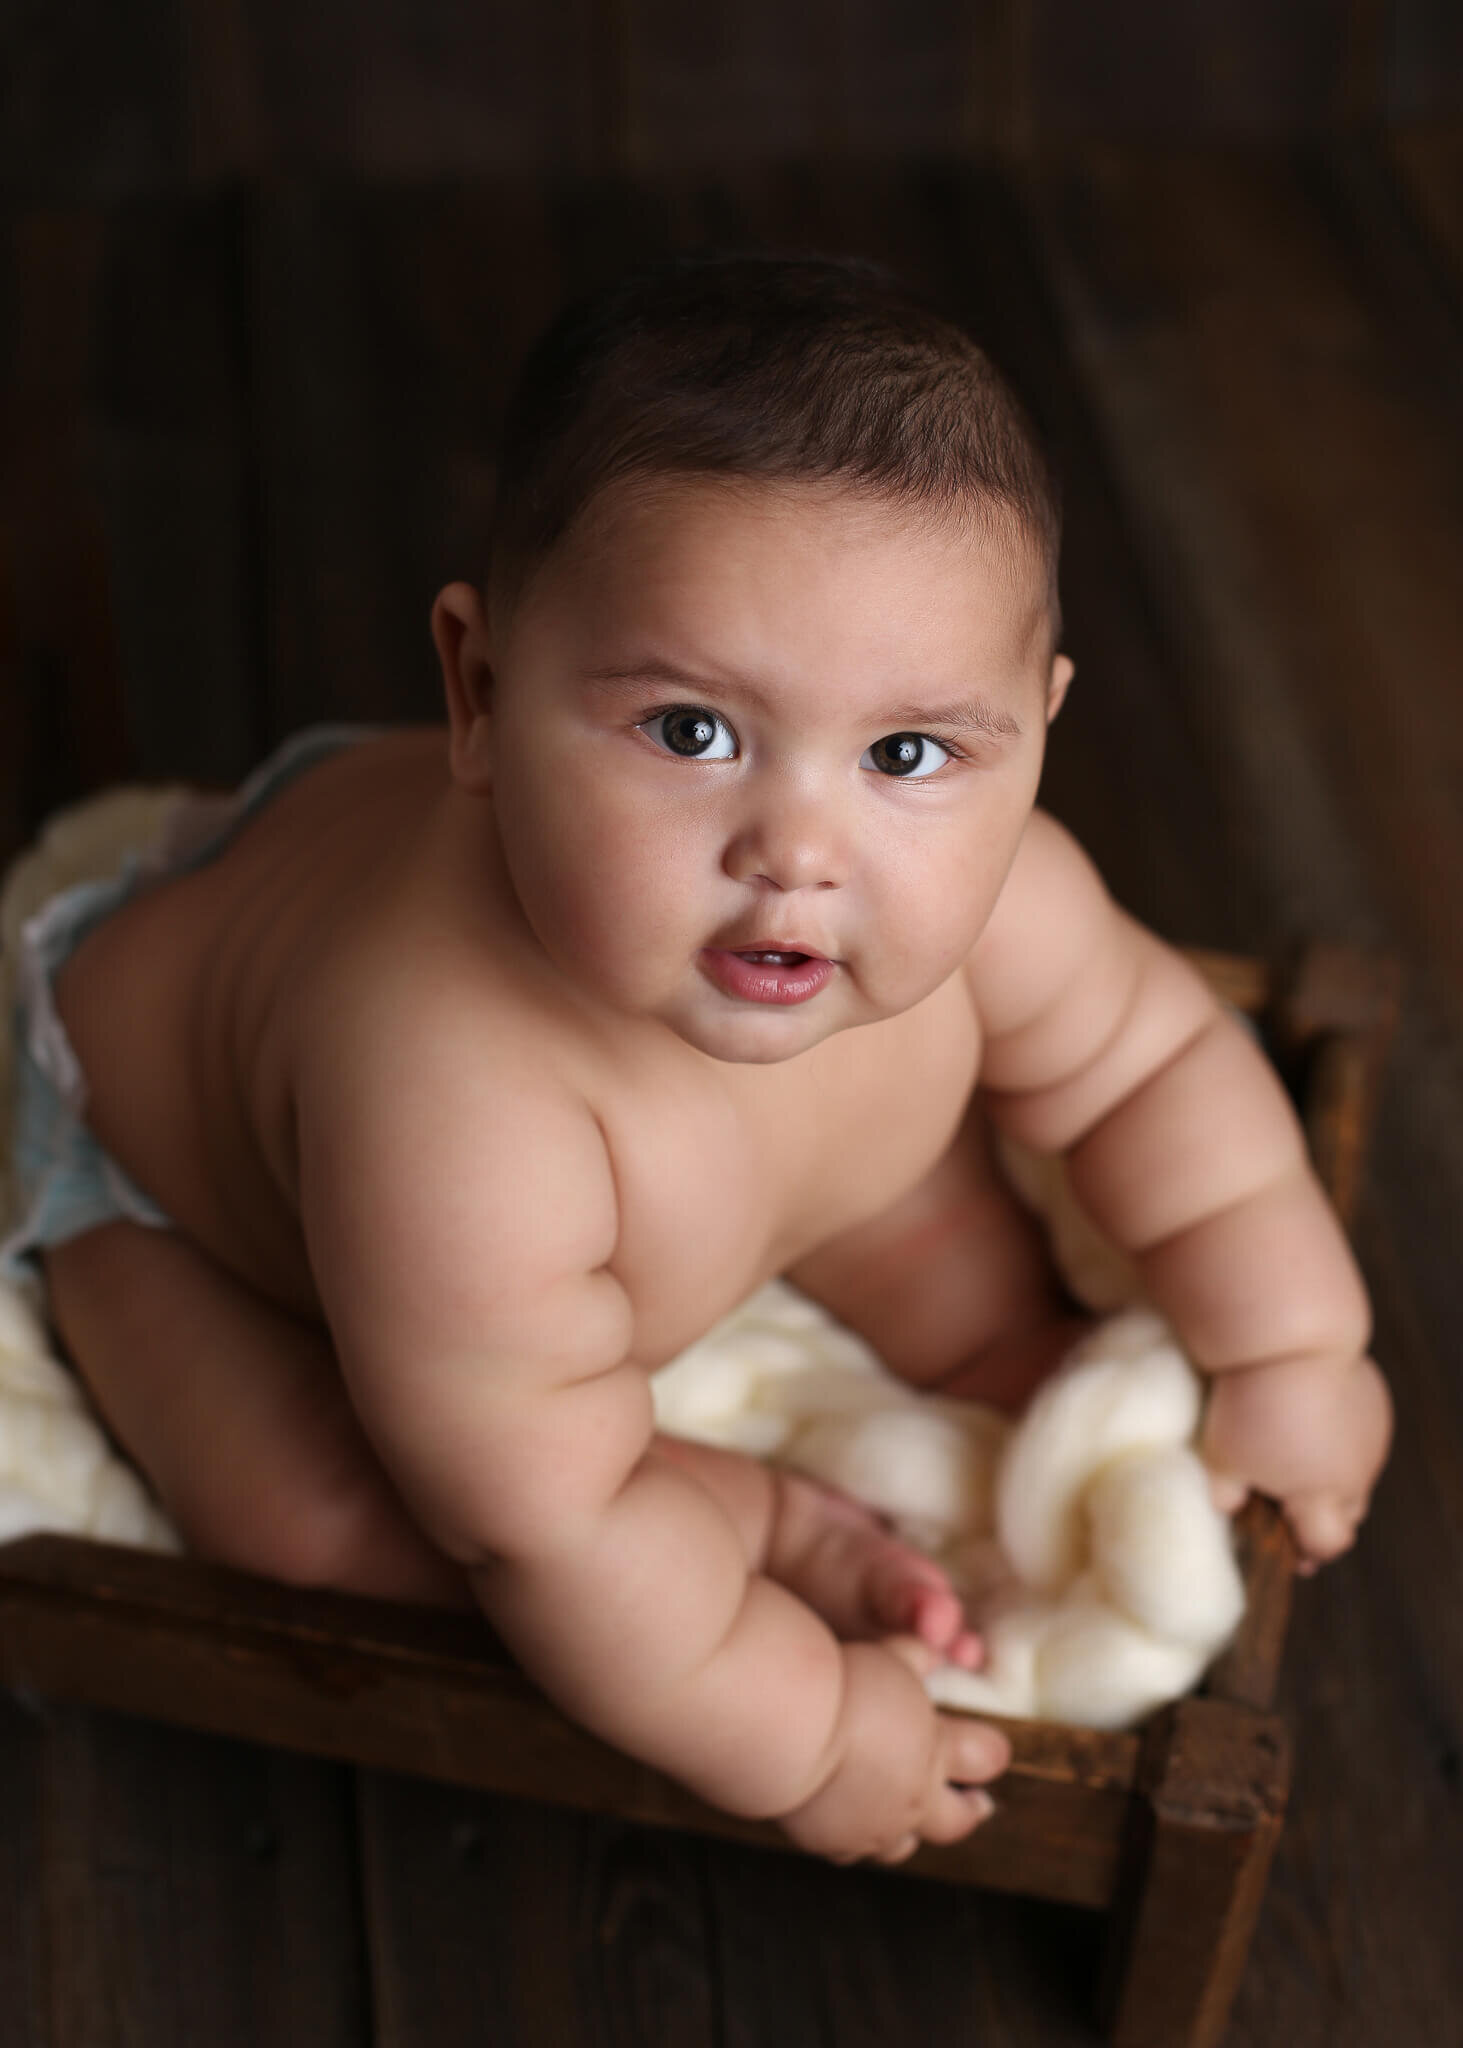  A picture from above of a cute baby boy sitting on a soft blanket, leaning over and looking up at the camera, reaching a new milestone from a baby photo session 